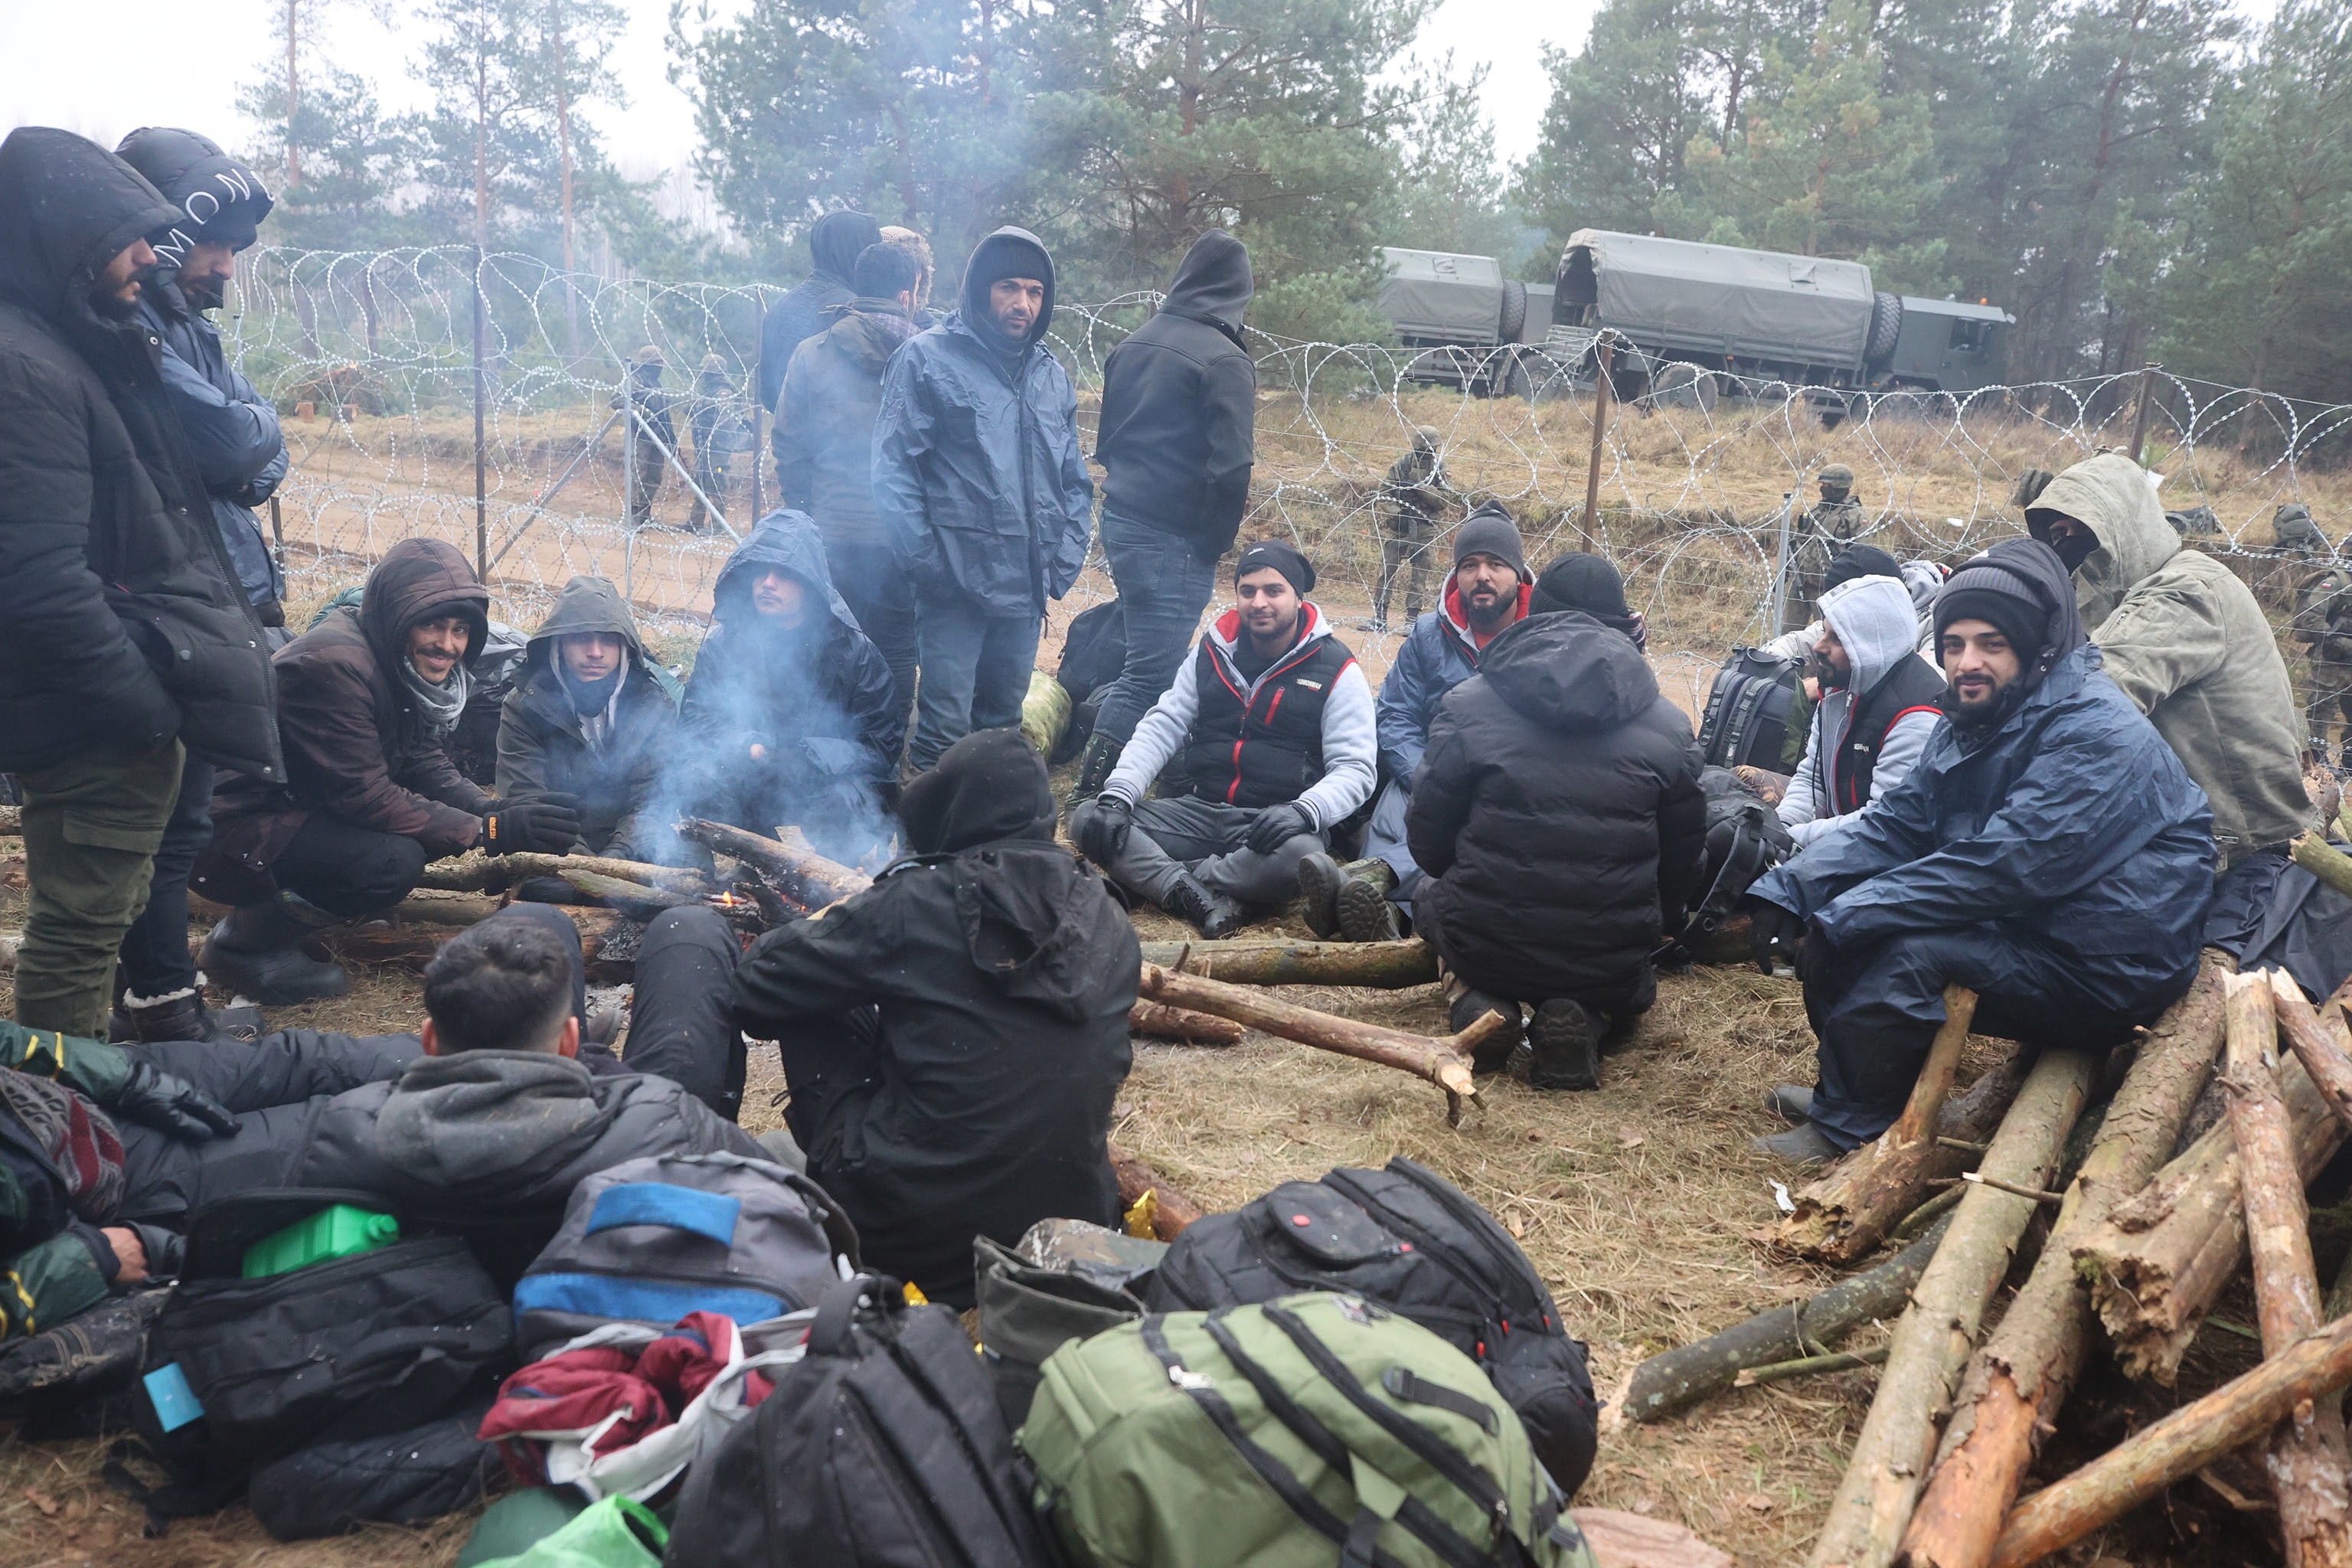 Migrants in their camp on the Belarusian-Polish border in Grodno, Belarus